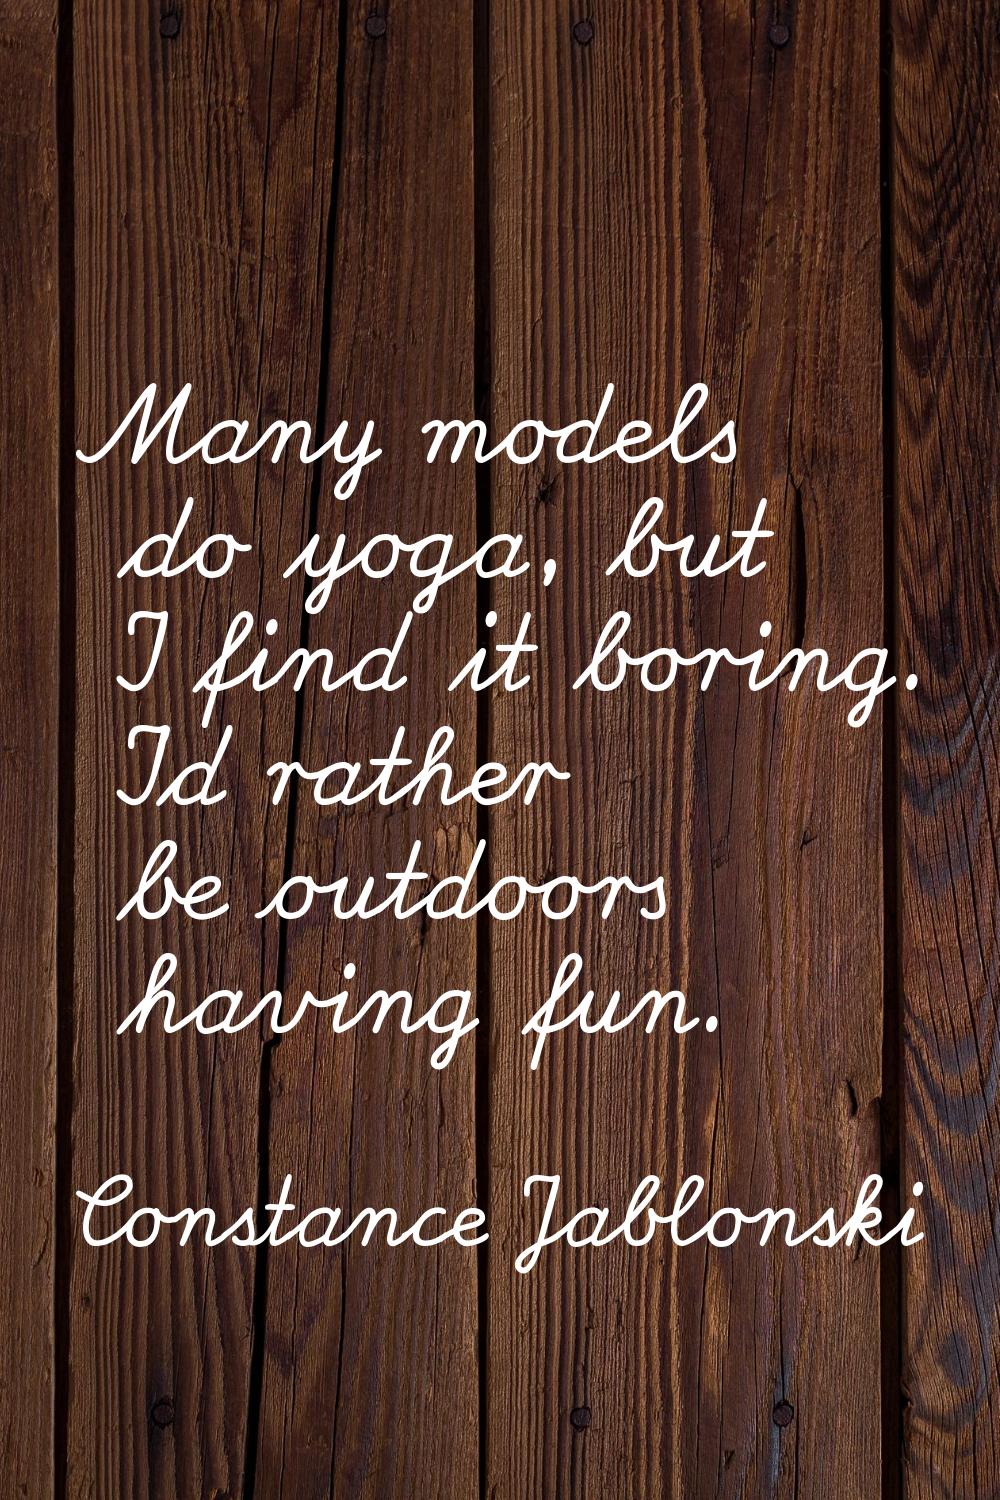 Many models do yoga, but I find it boring. I'd rather be outdoors having fun.